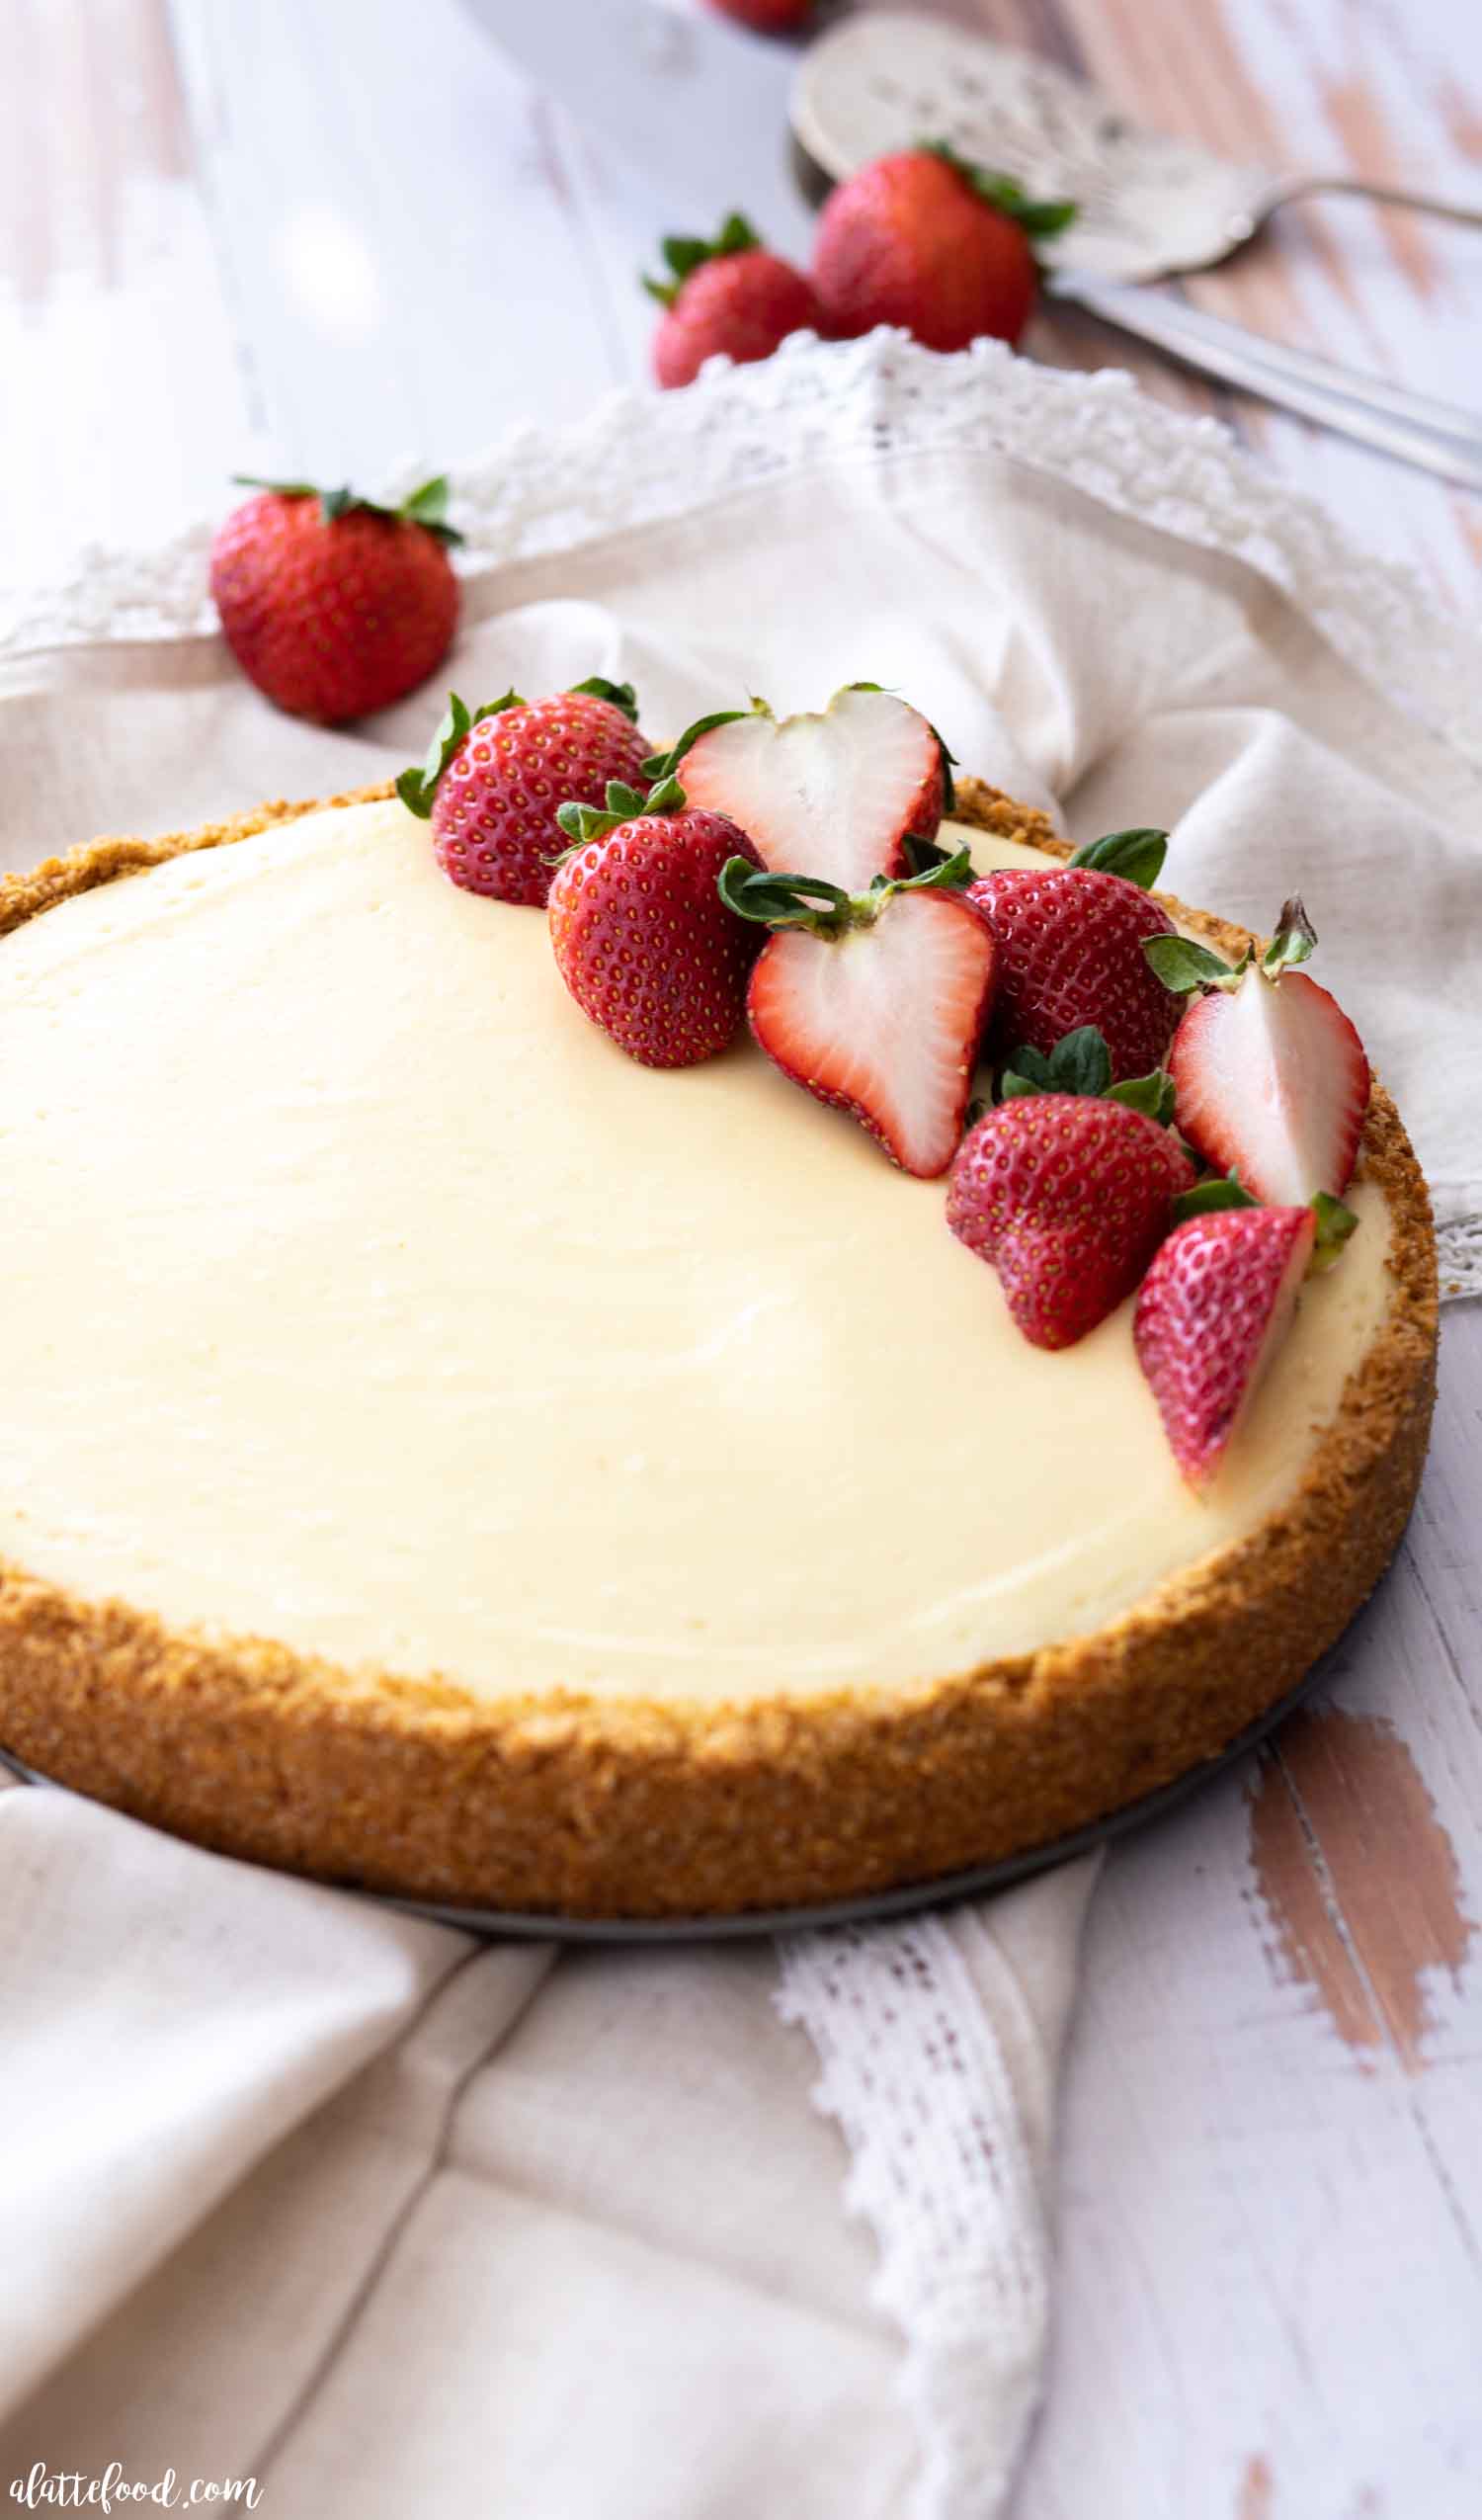 Can You Make Cheesecake Without a Springform Pan? Yes. Here's How.